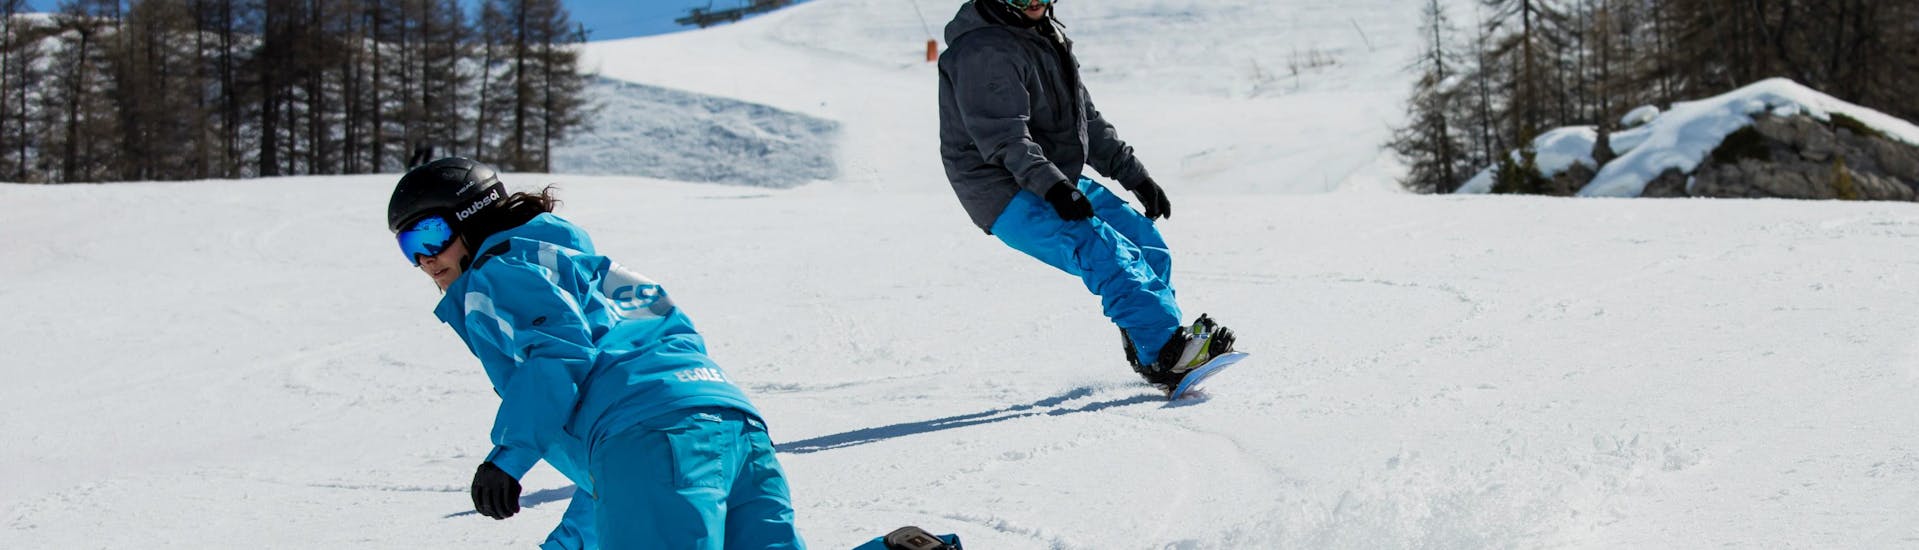 A snowboarding lesson for all levels in Les Orres with the ESI Ozone. 